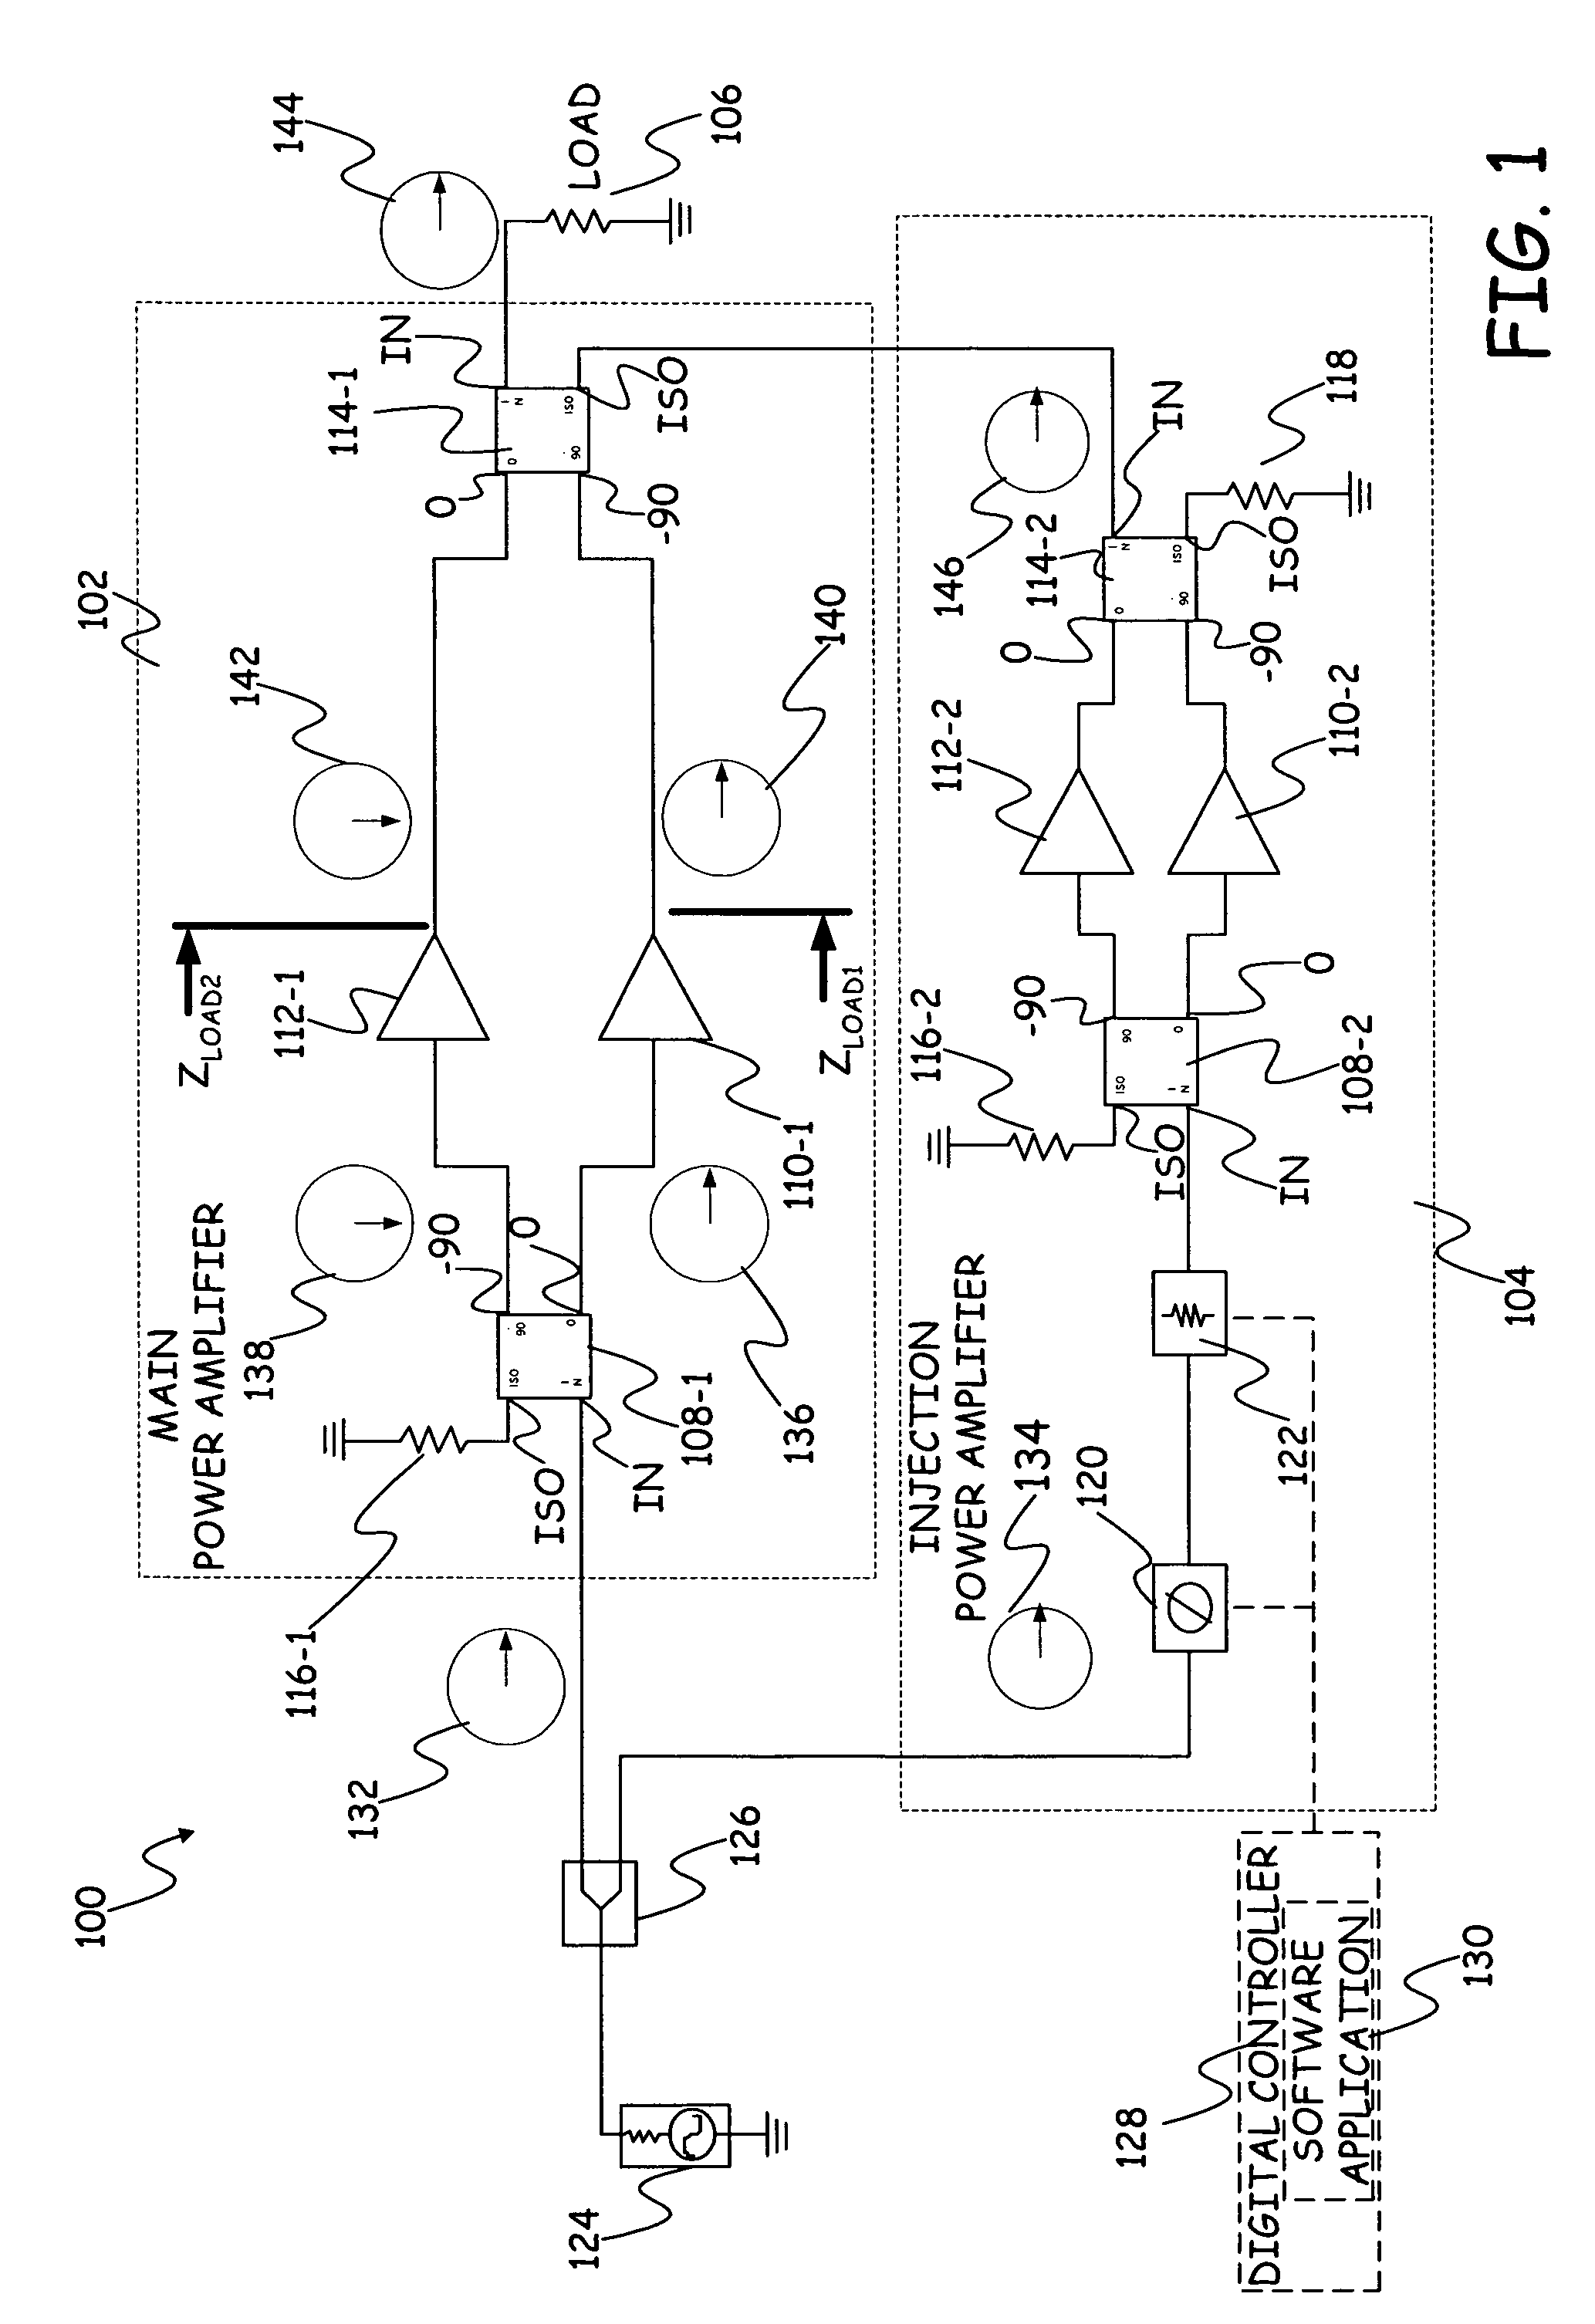 Electronically tuned power amplifier